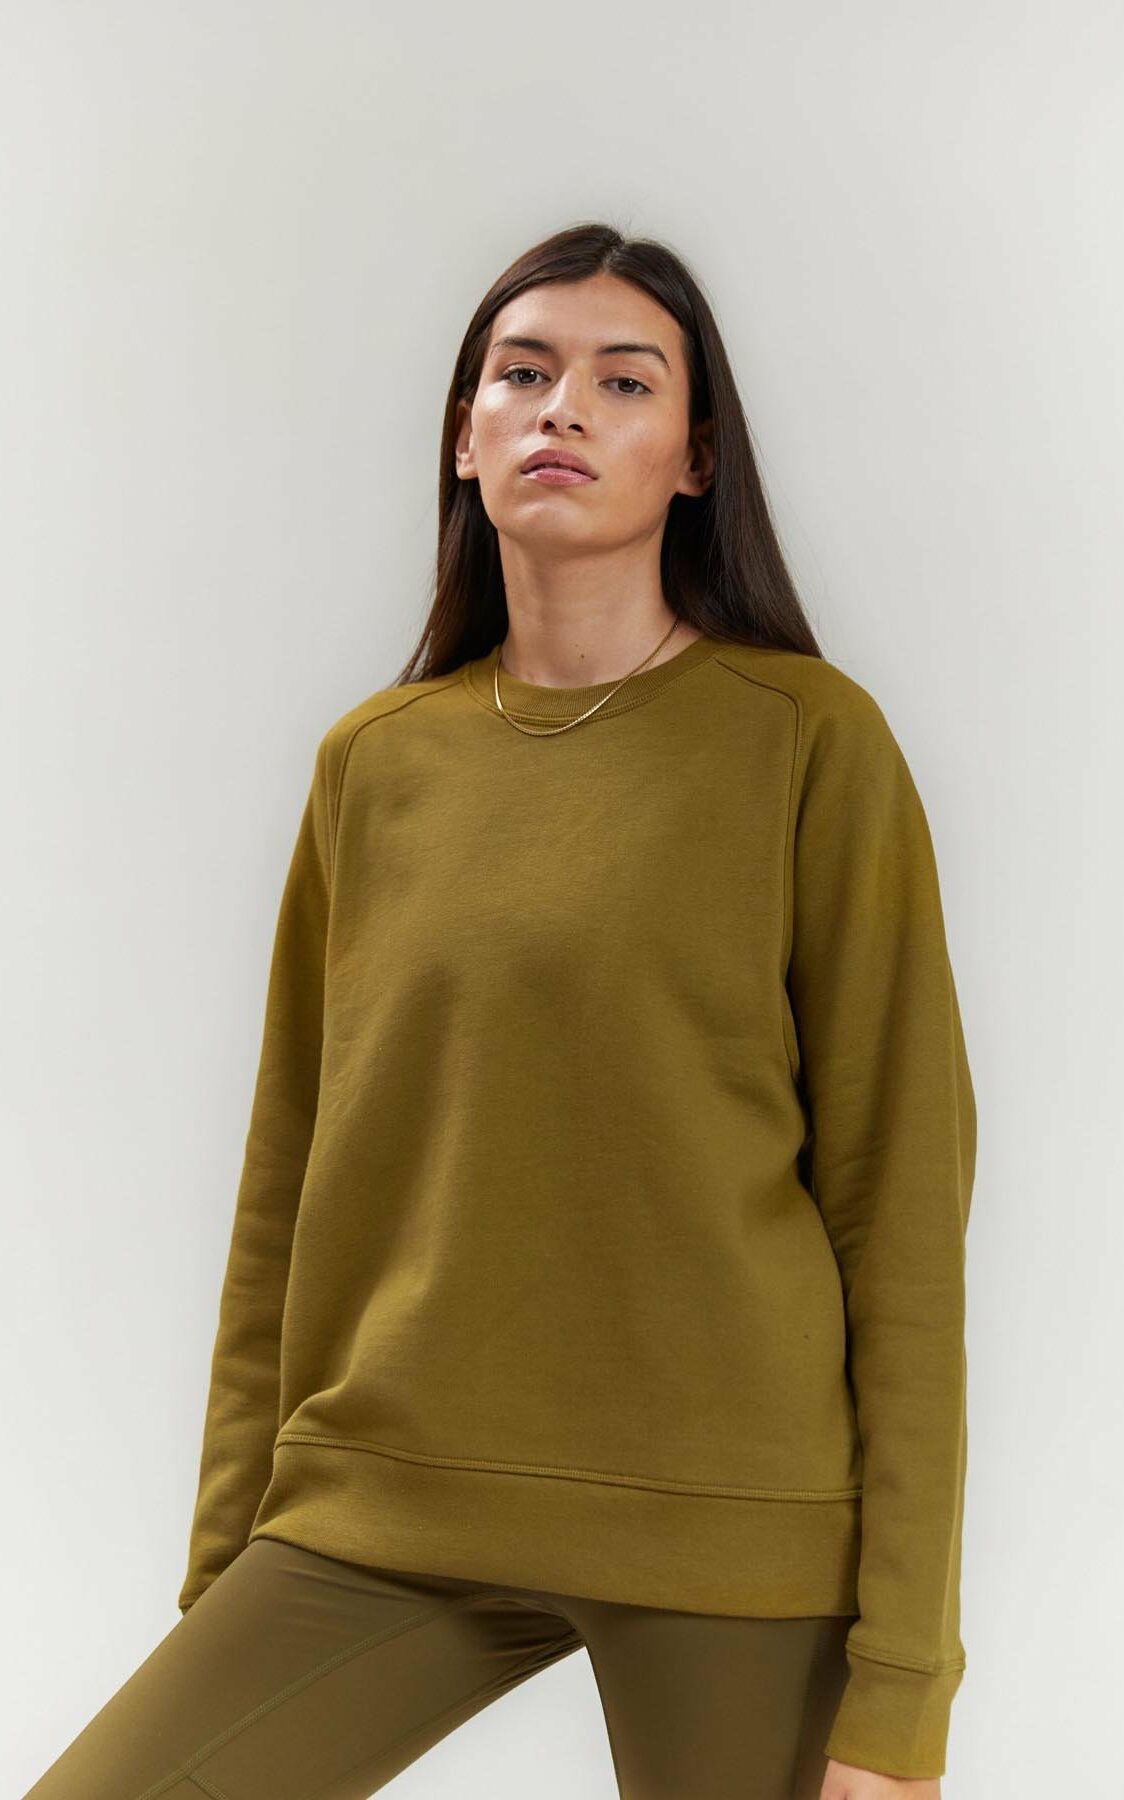 A white person with long straight brown hair stands in an olive colored crewneck.-What does Androgyny in Plus Size Fashion Mean to You? Part I